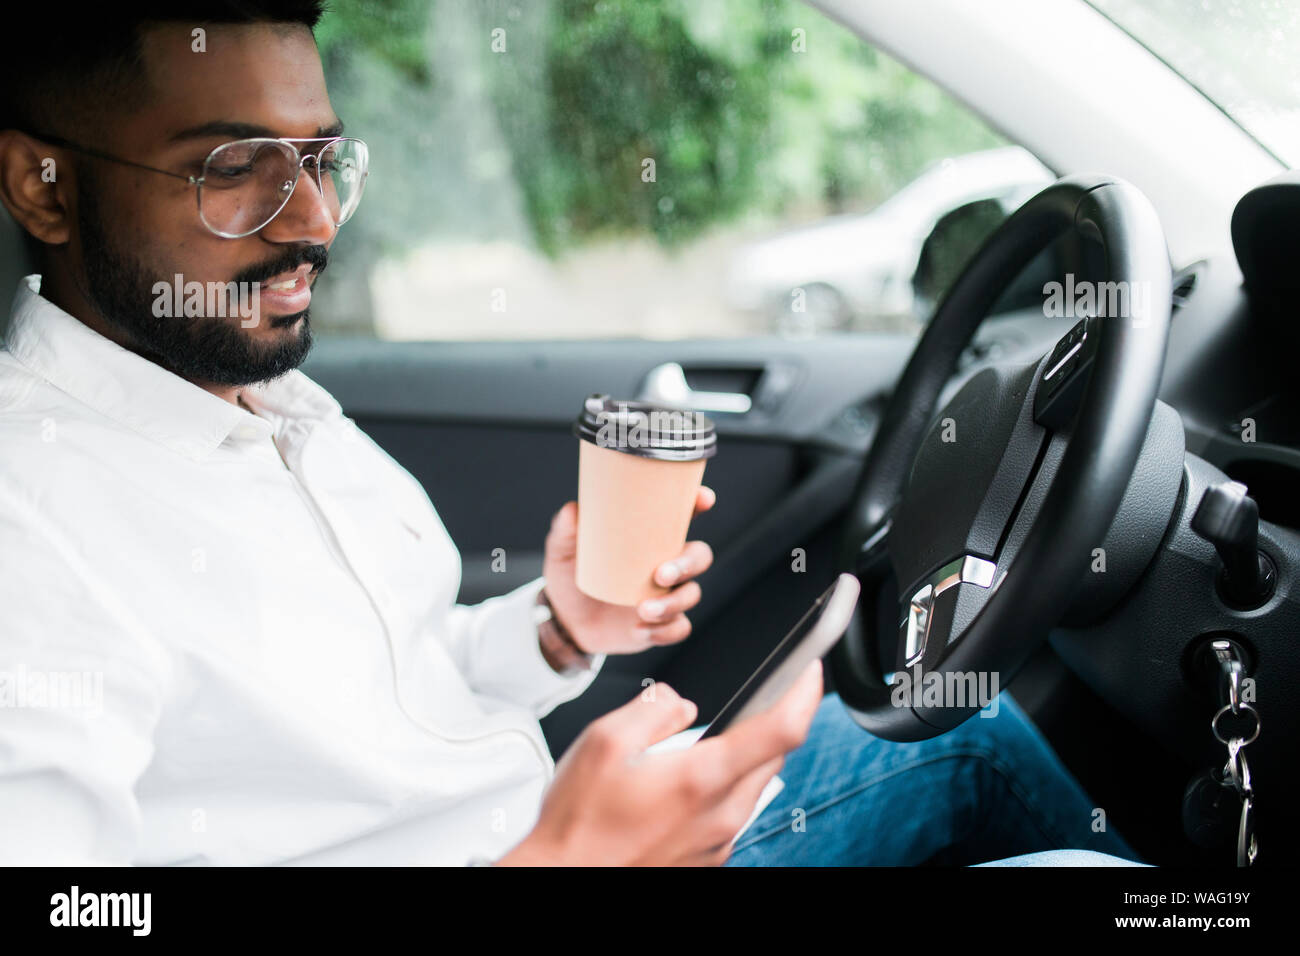 Stylish driver with a smartphone in hand and paper cup of hot coffee in the driver's seat. The concept of inattention at the wheel, rest, coffee break Stock Photo